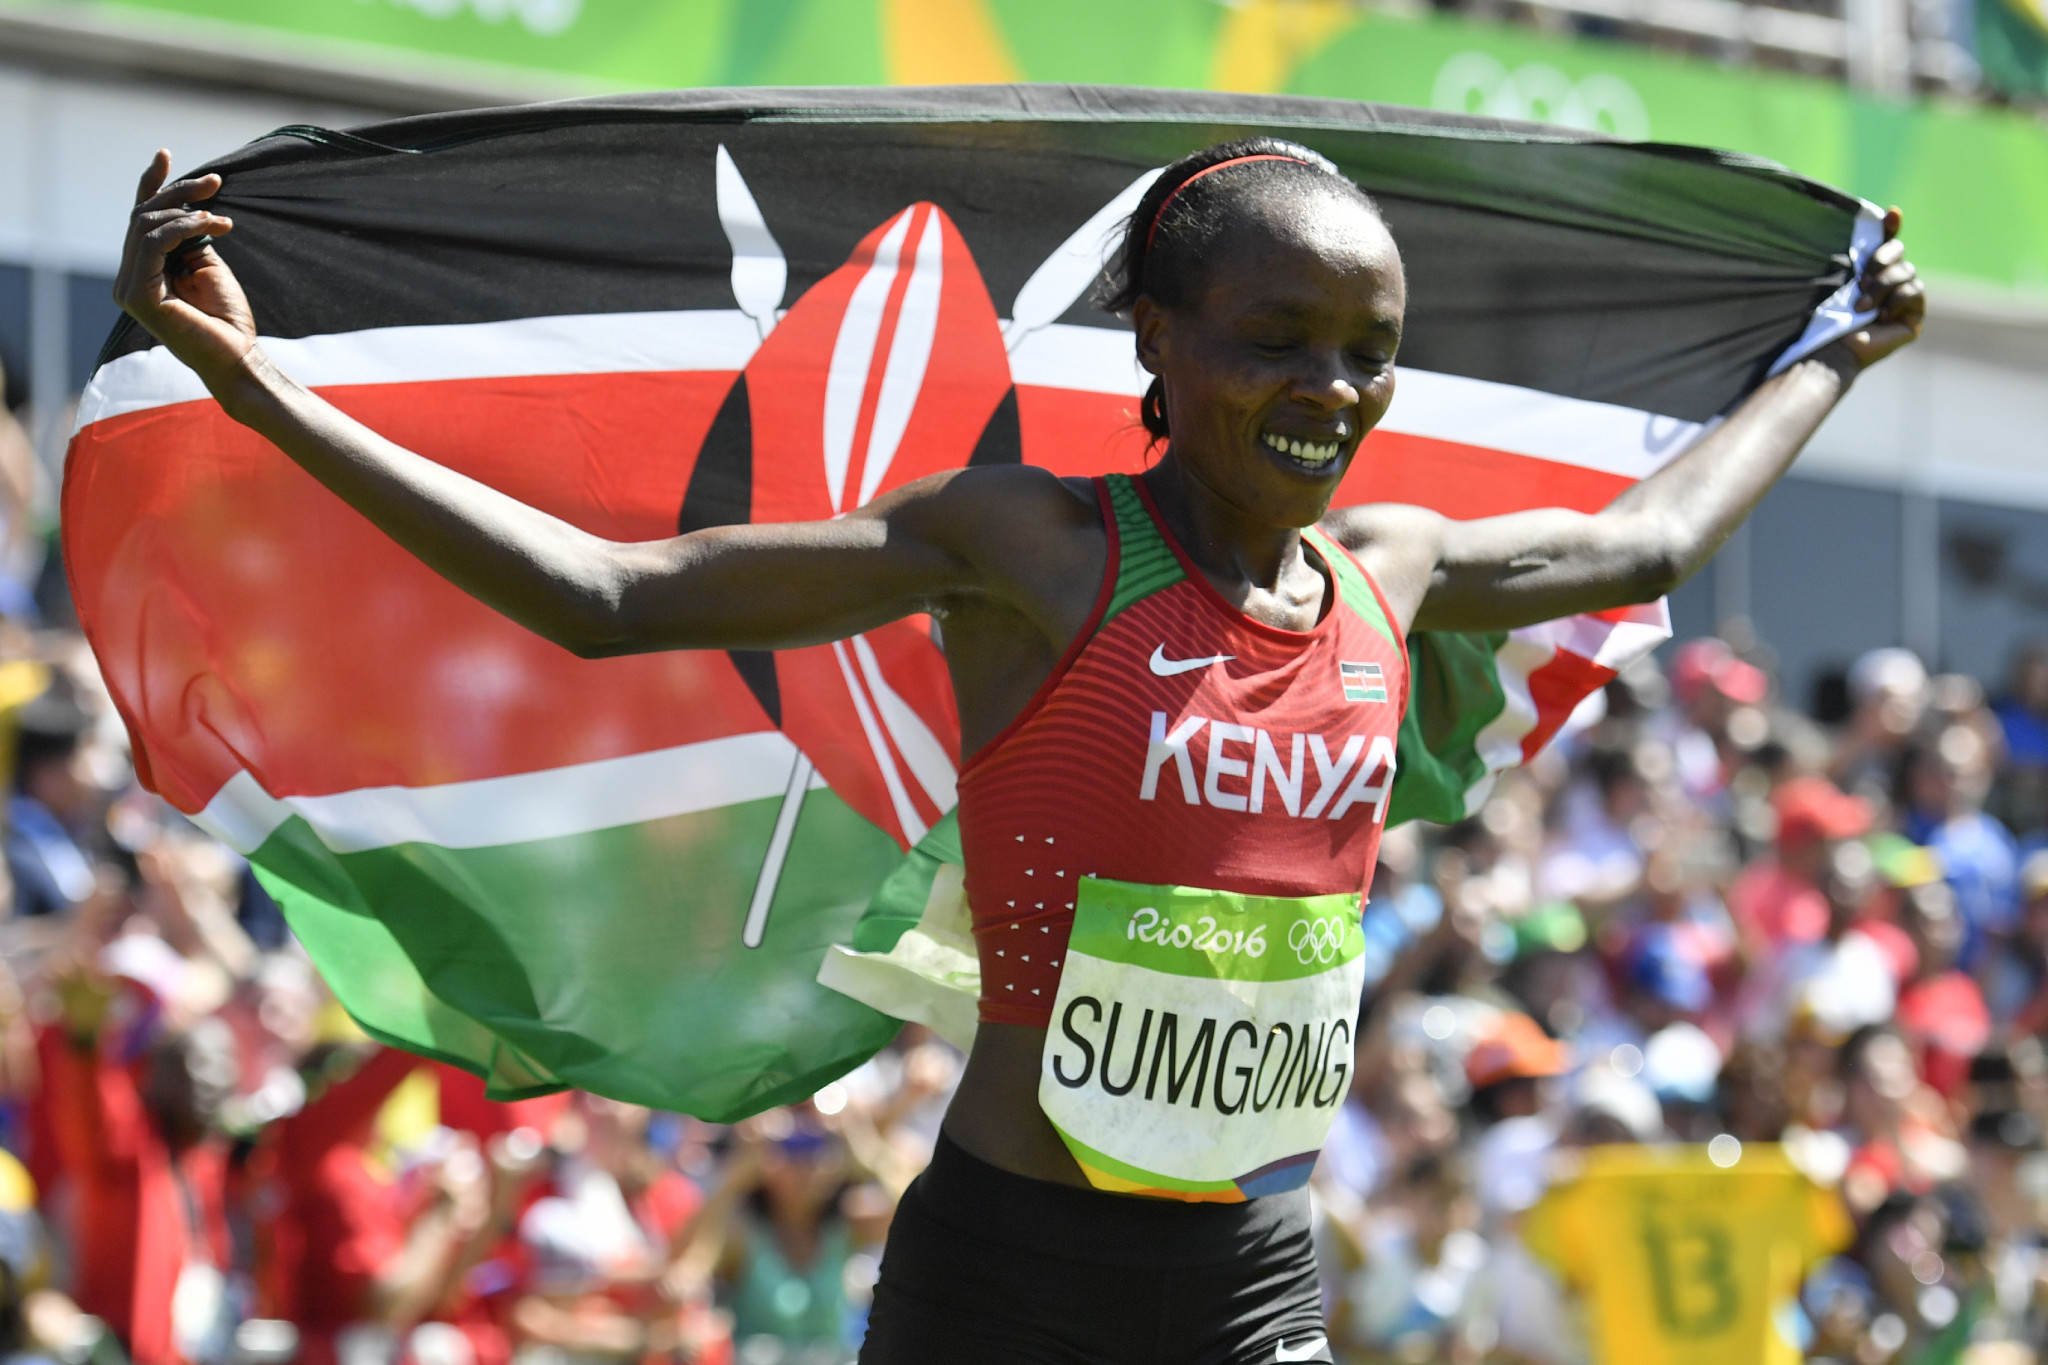 The 2016 Olympic marathon gold medallist Jemima Sumgong is one of the Kenyan athletes serving a ban for a positive test and tampering ©Getty Images